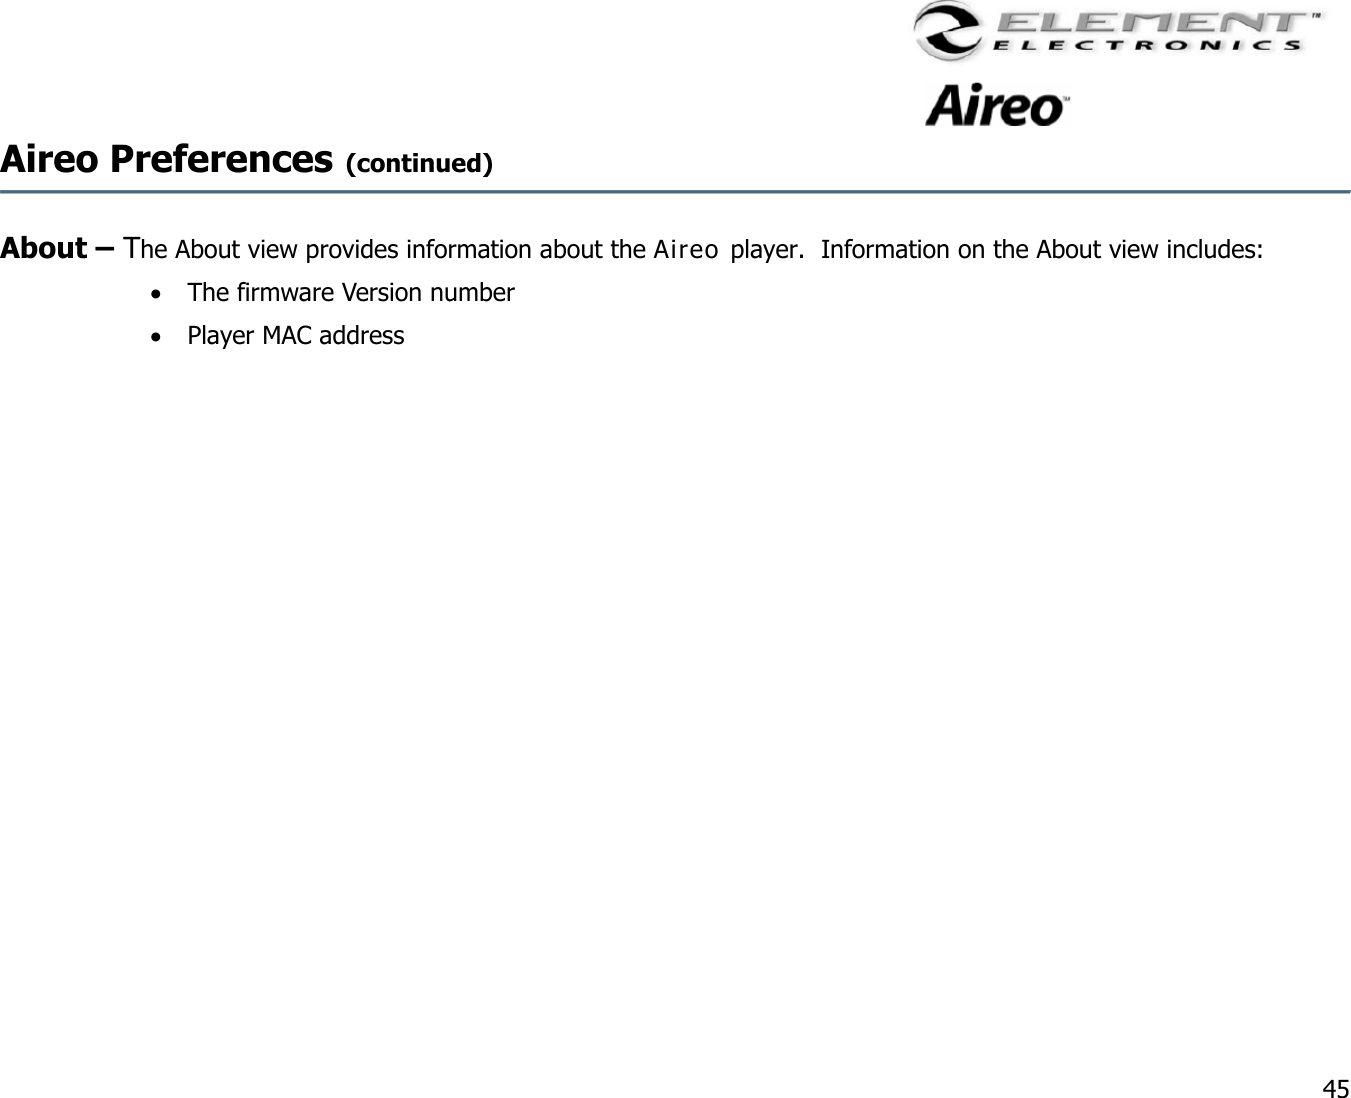                                                                                    45 Aireo Preferences (continued)     About – The About view provides information about the Aireo player.  Information on the About view includes: •  The firmware Version number •  Player MAC address 